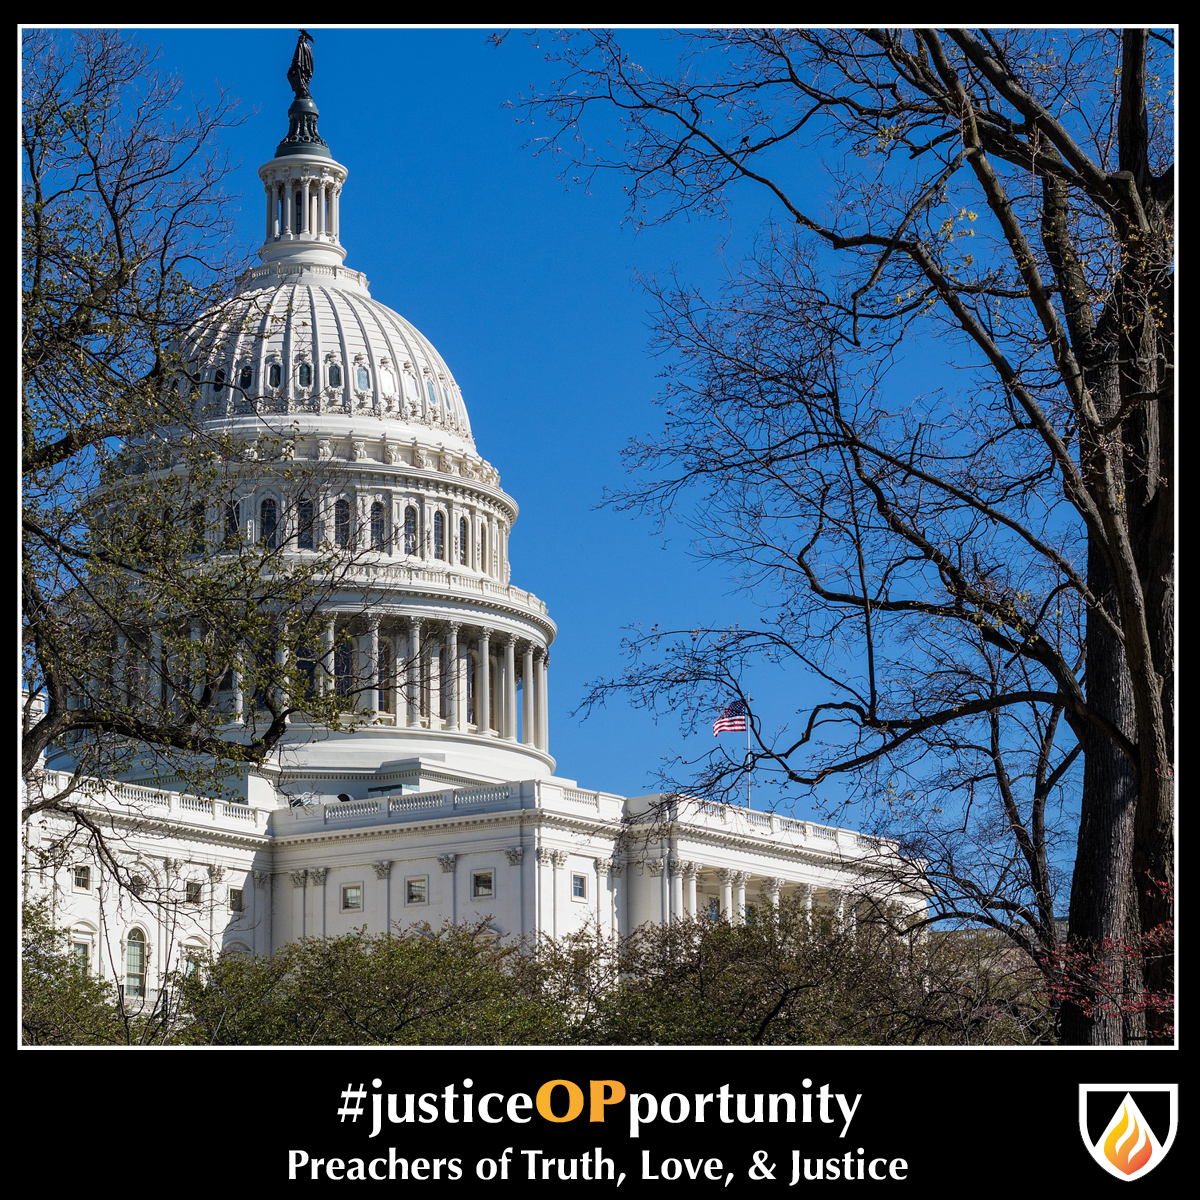 #justiceOPportunity Thursday—January 14, 2021